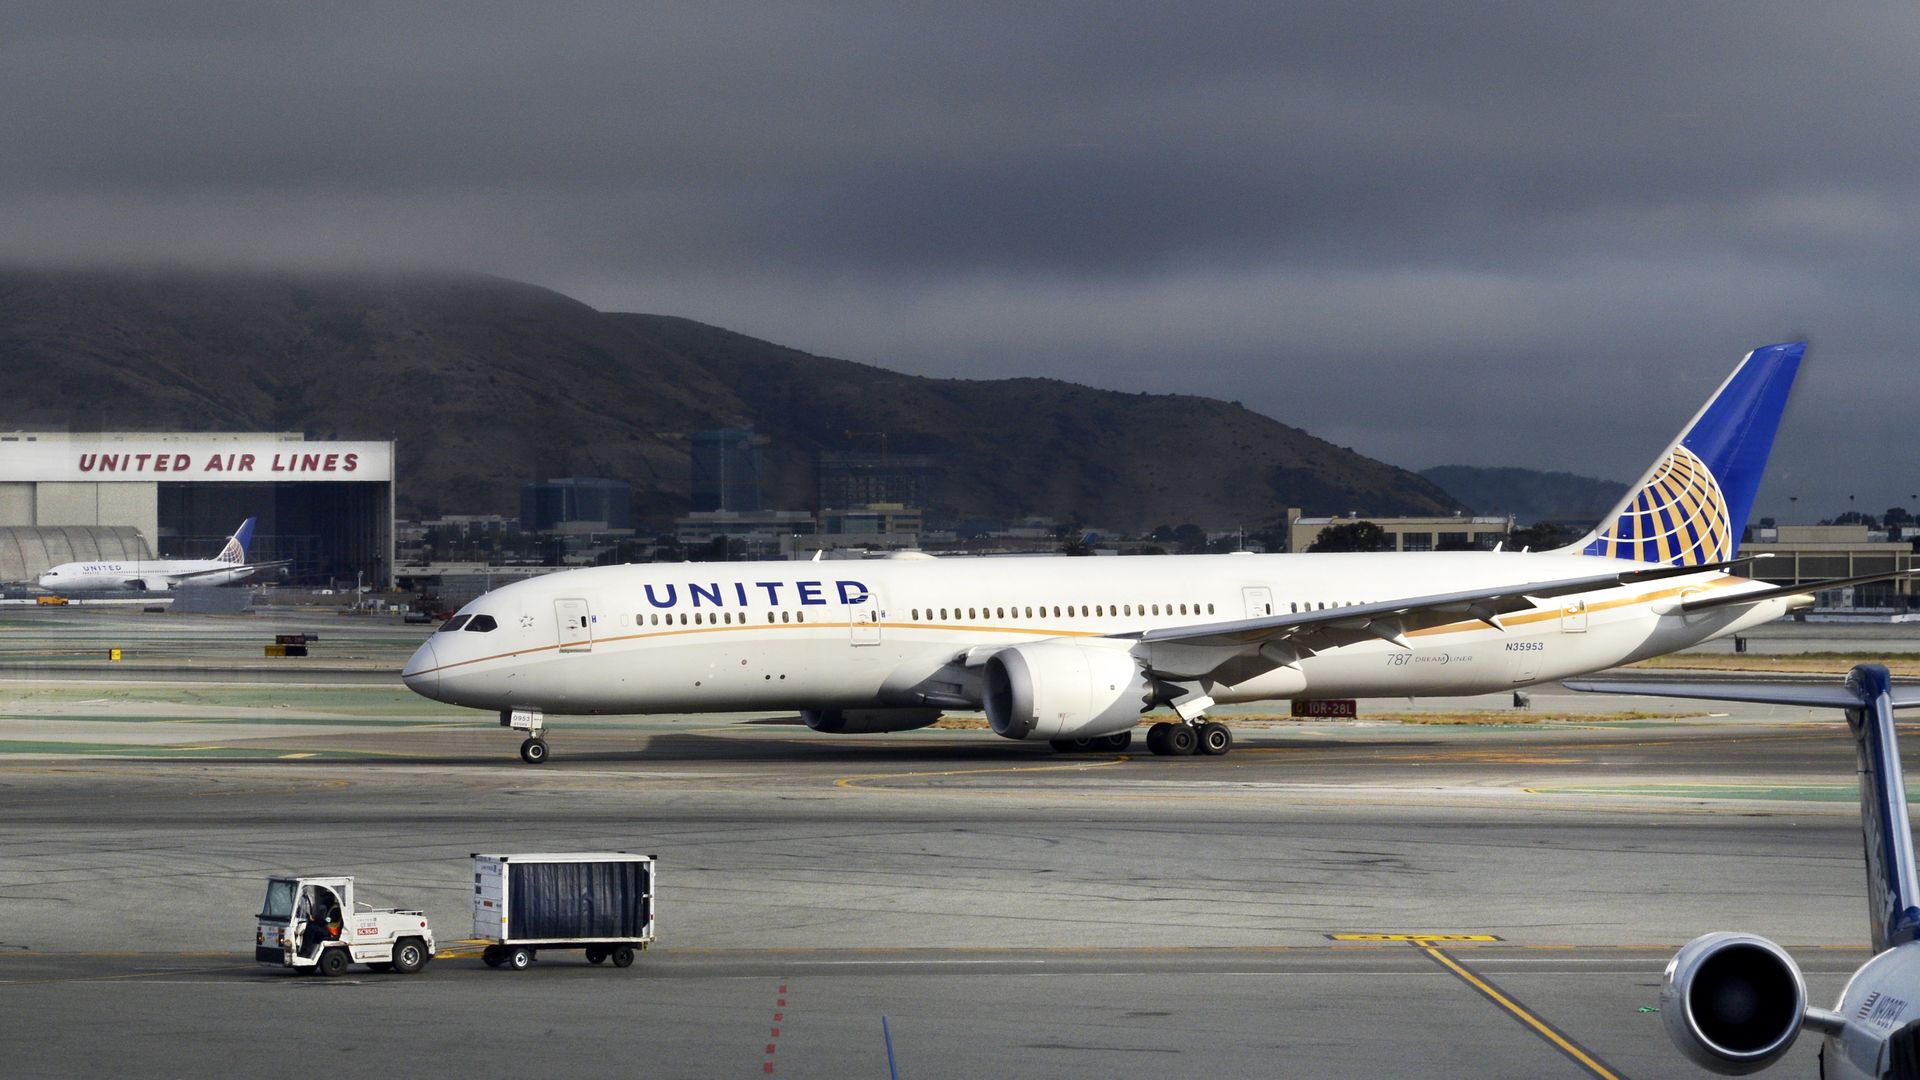 United Boeing 787 aircraft seen on the ground.